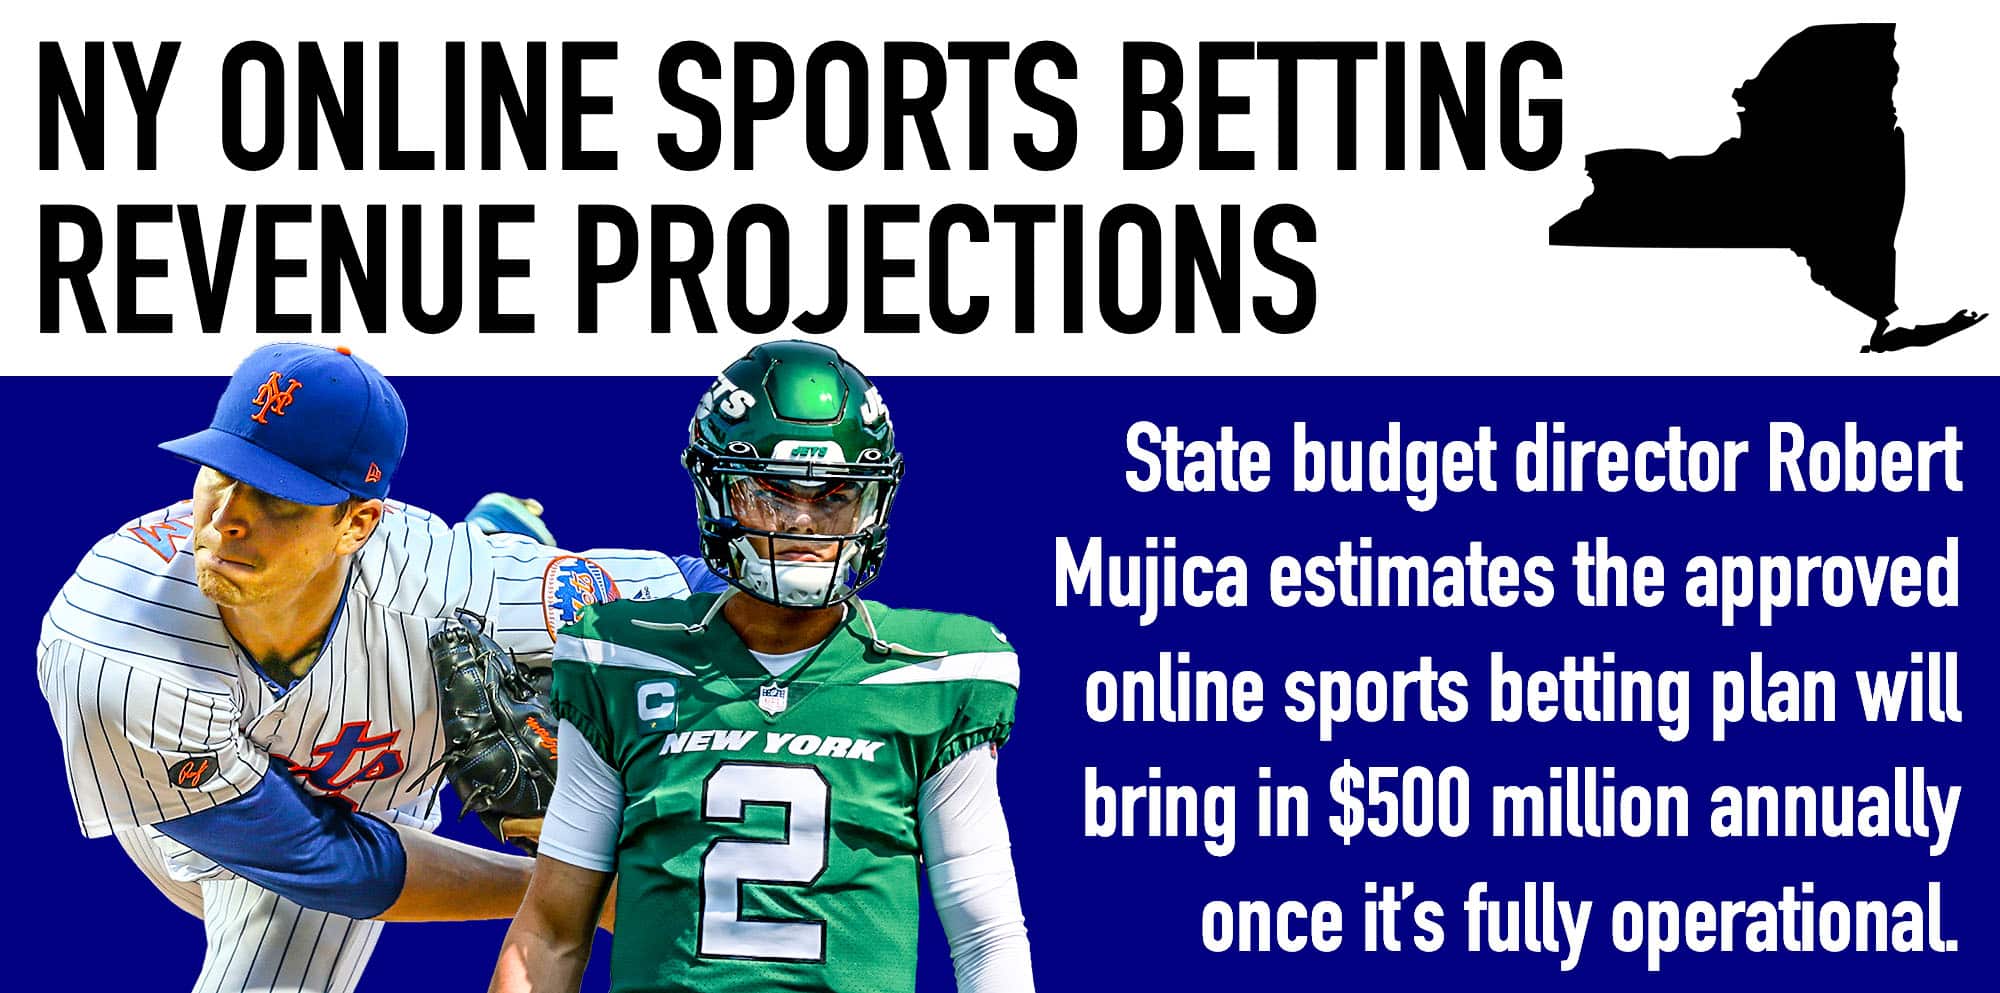 NY Online Sports Betting, Projected Revenue